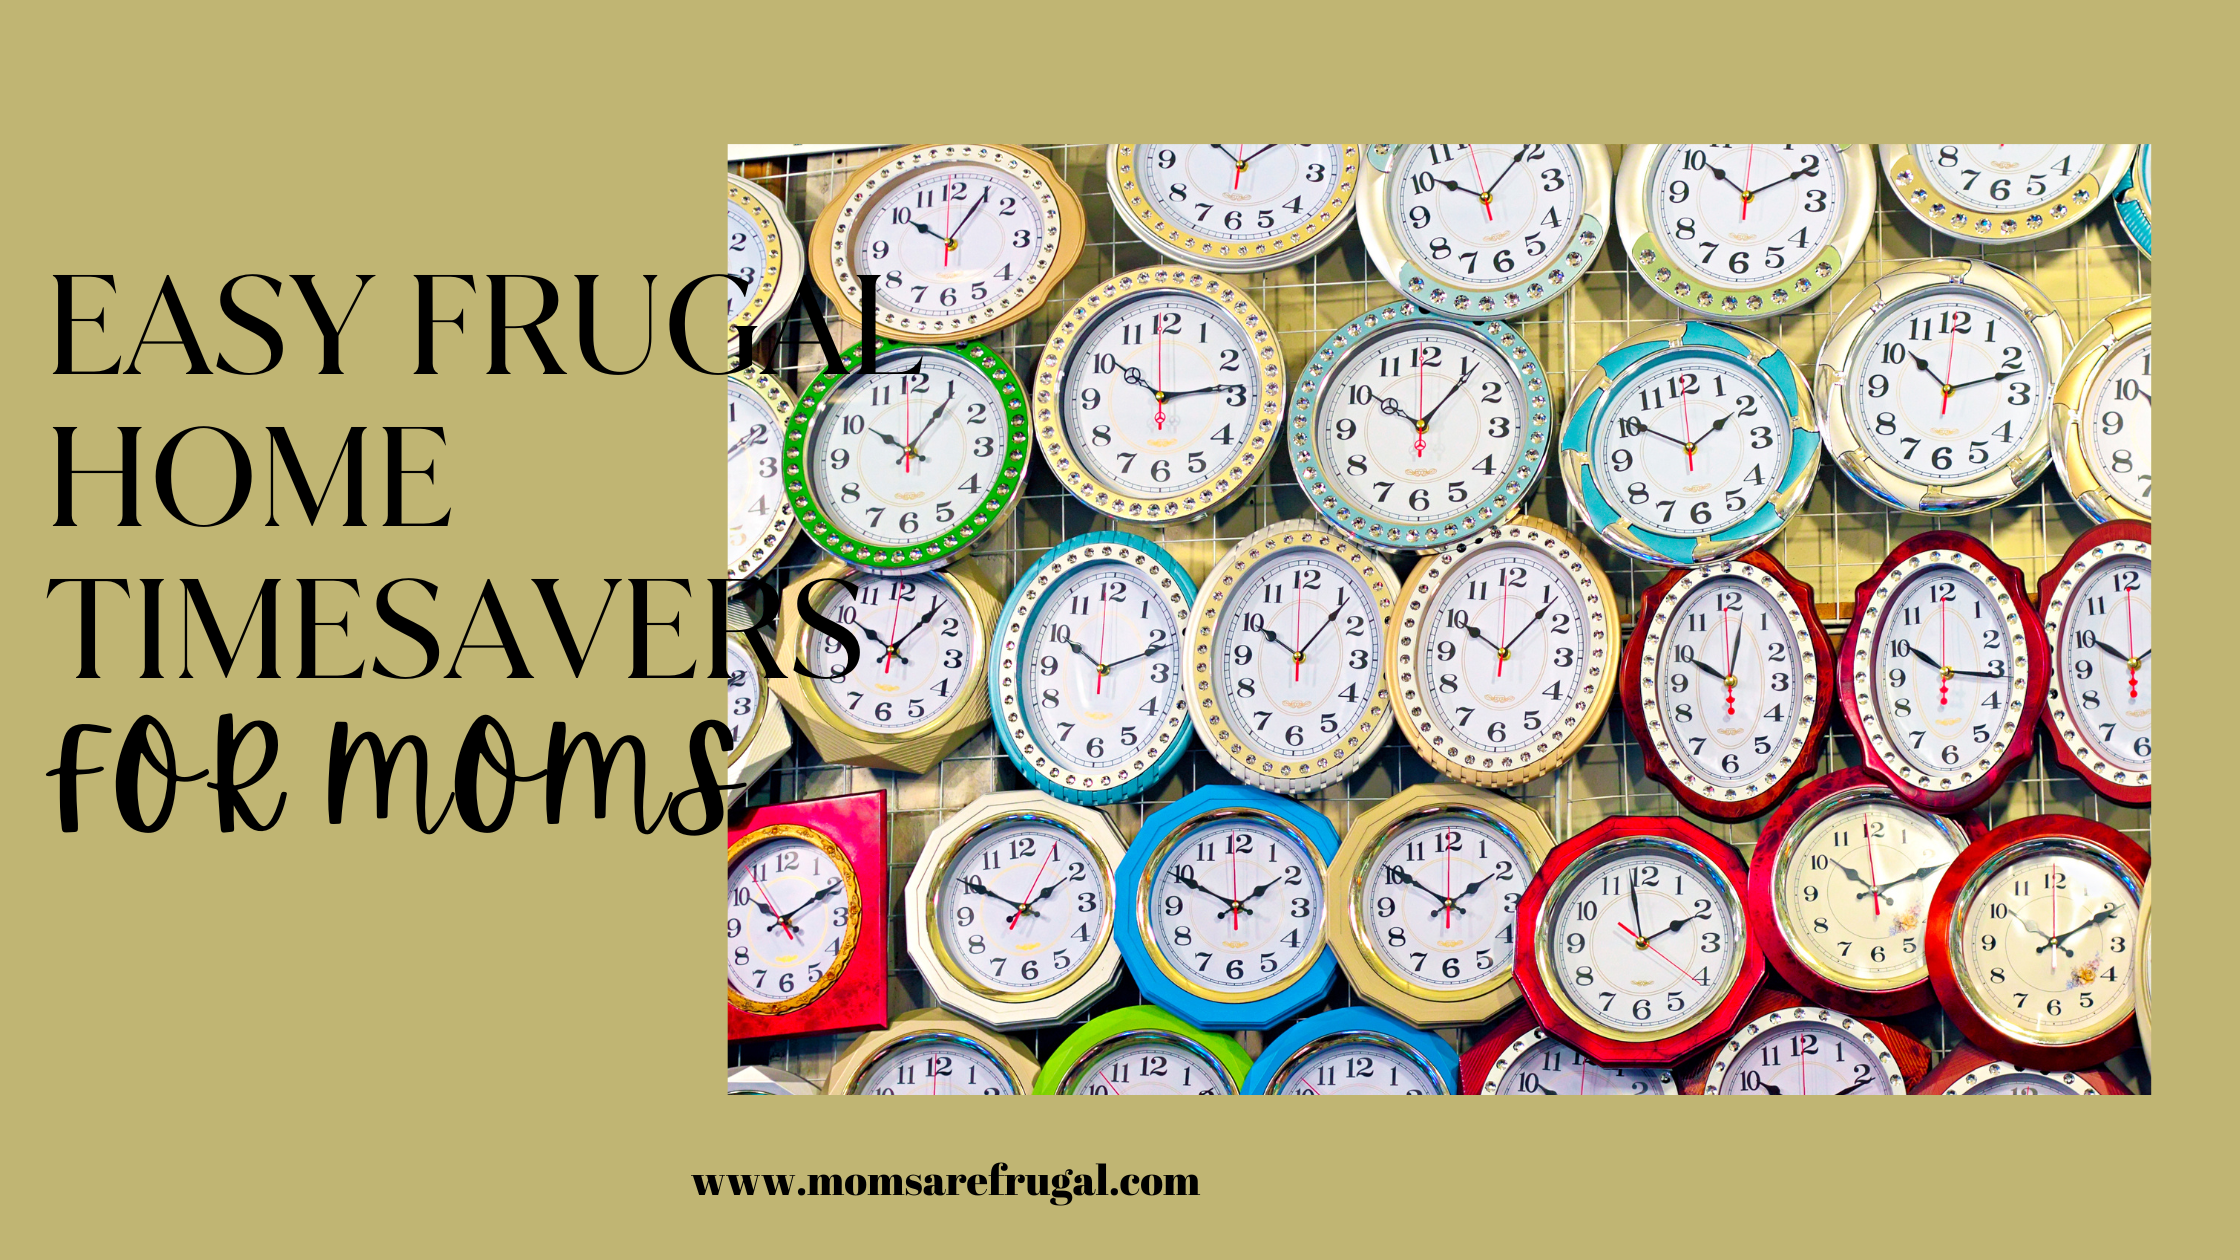 Easy Frugal Home Timesavers for Frugal Moms